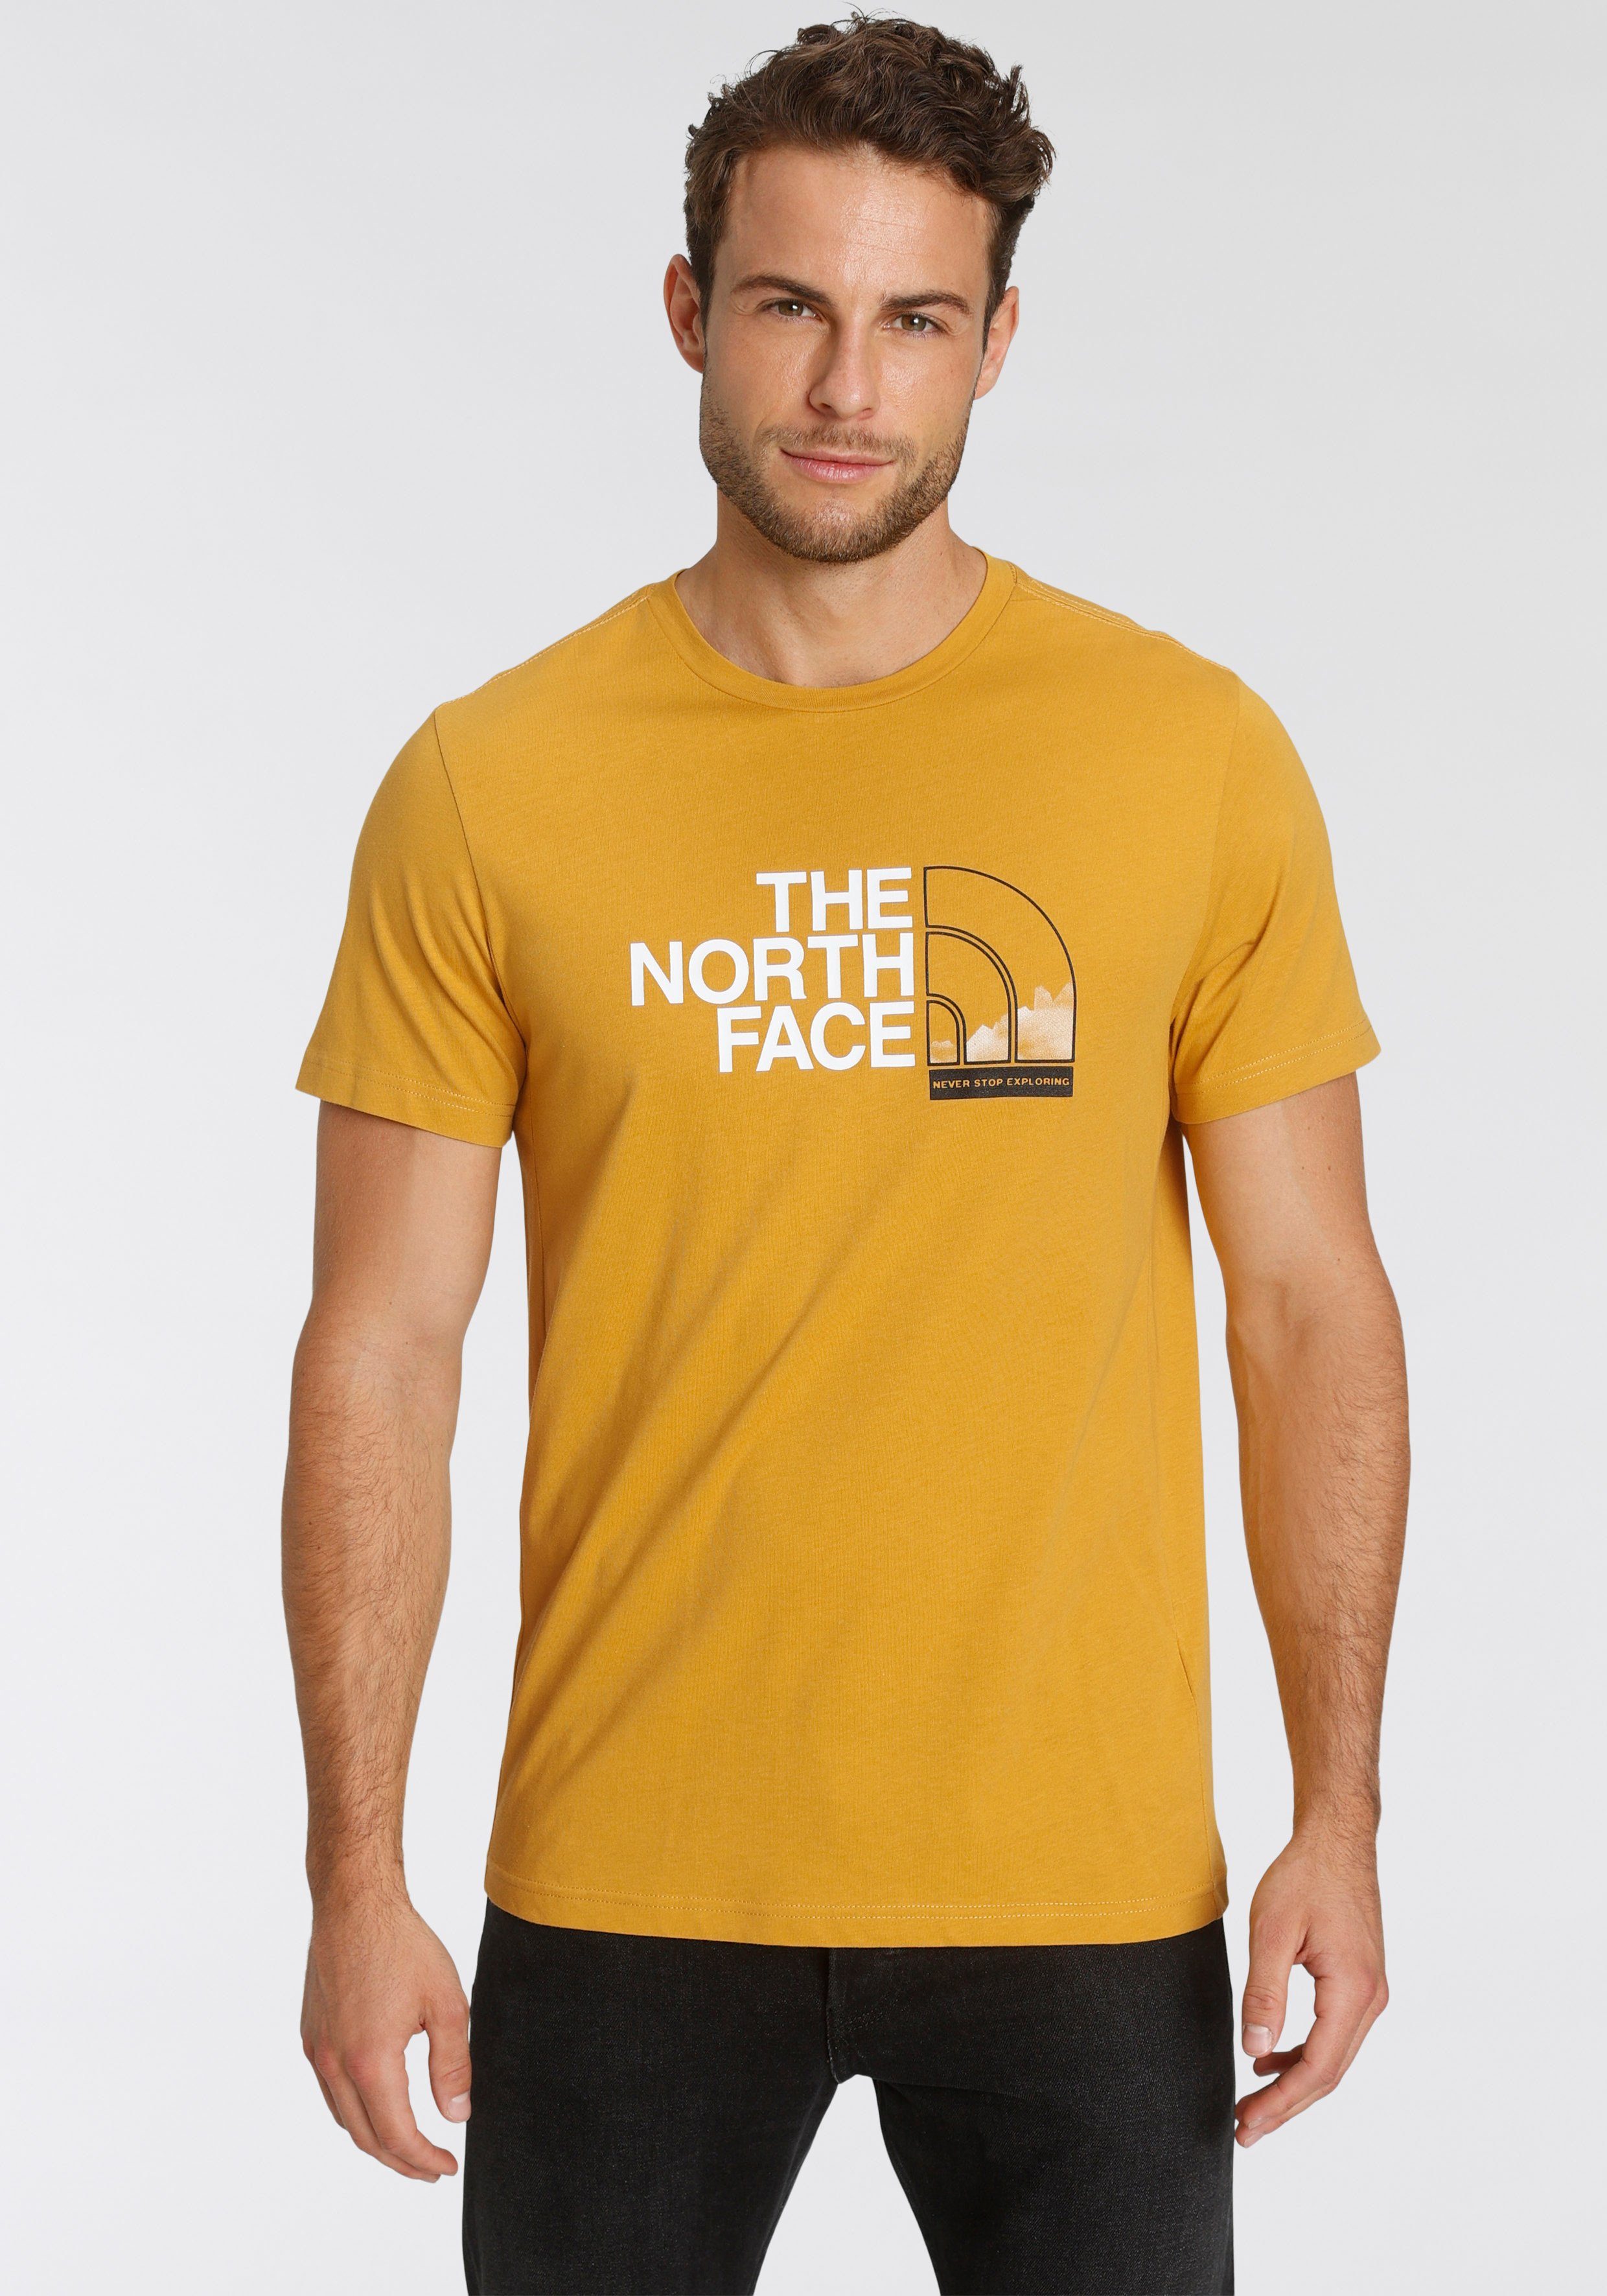 The North Face T-Shirt online kaufen | OTTO